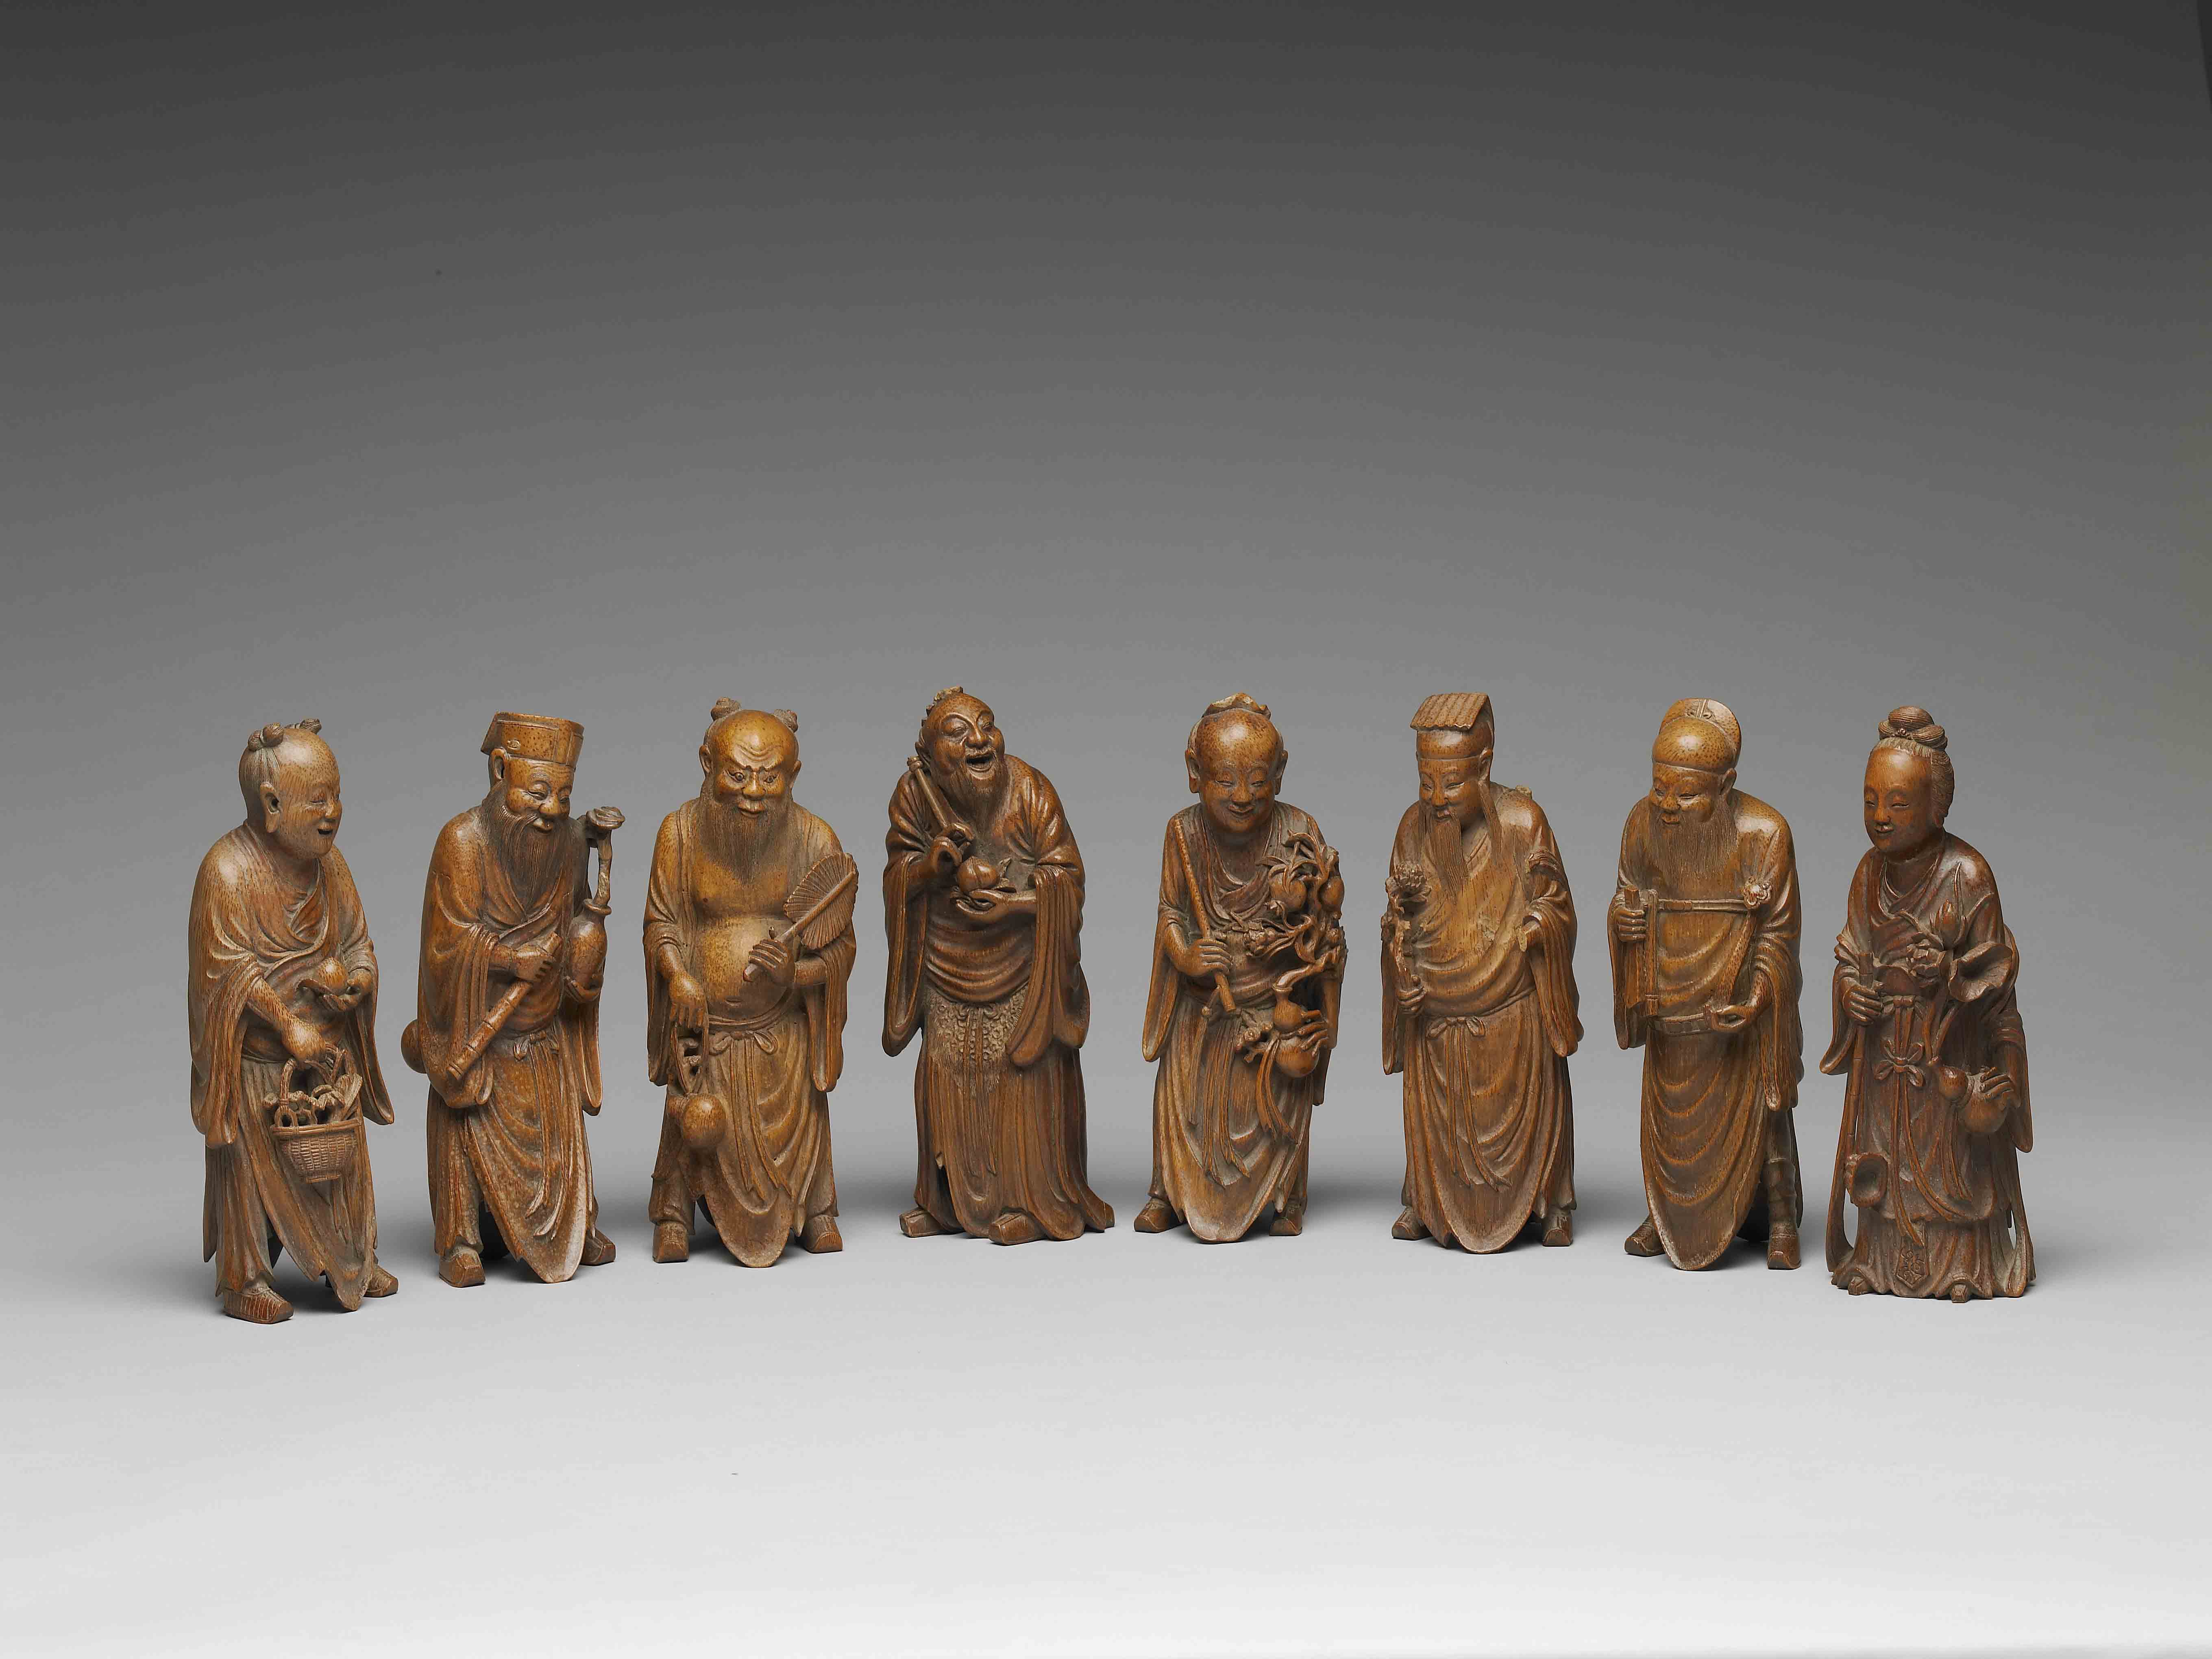 Bamboo carving of the Eight Immortals